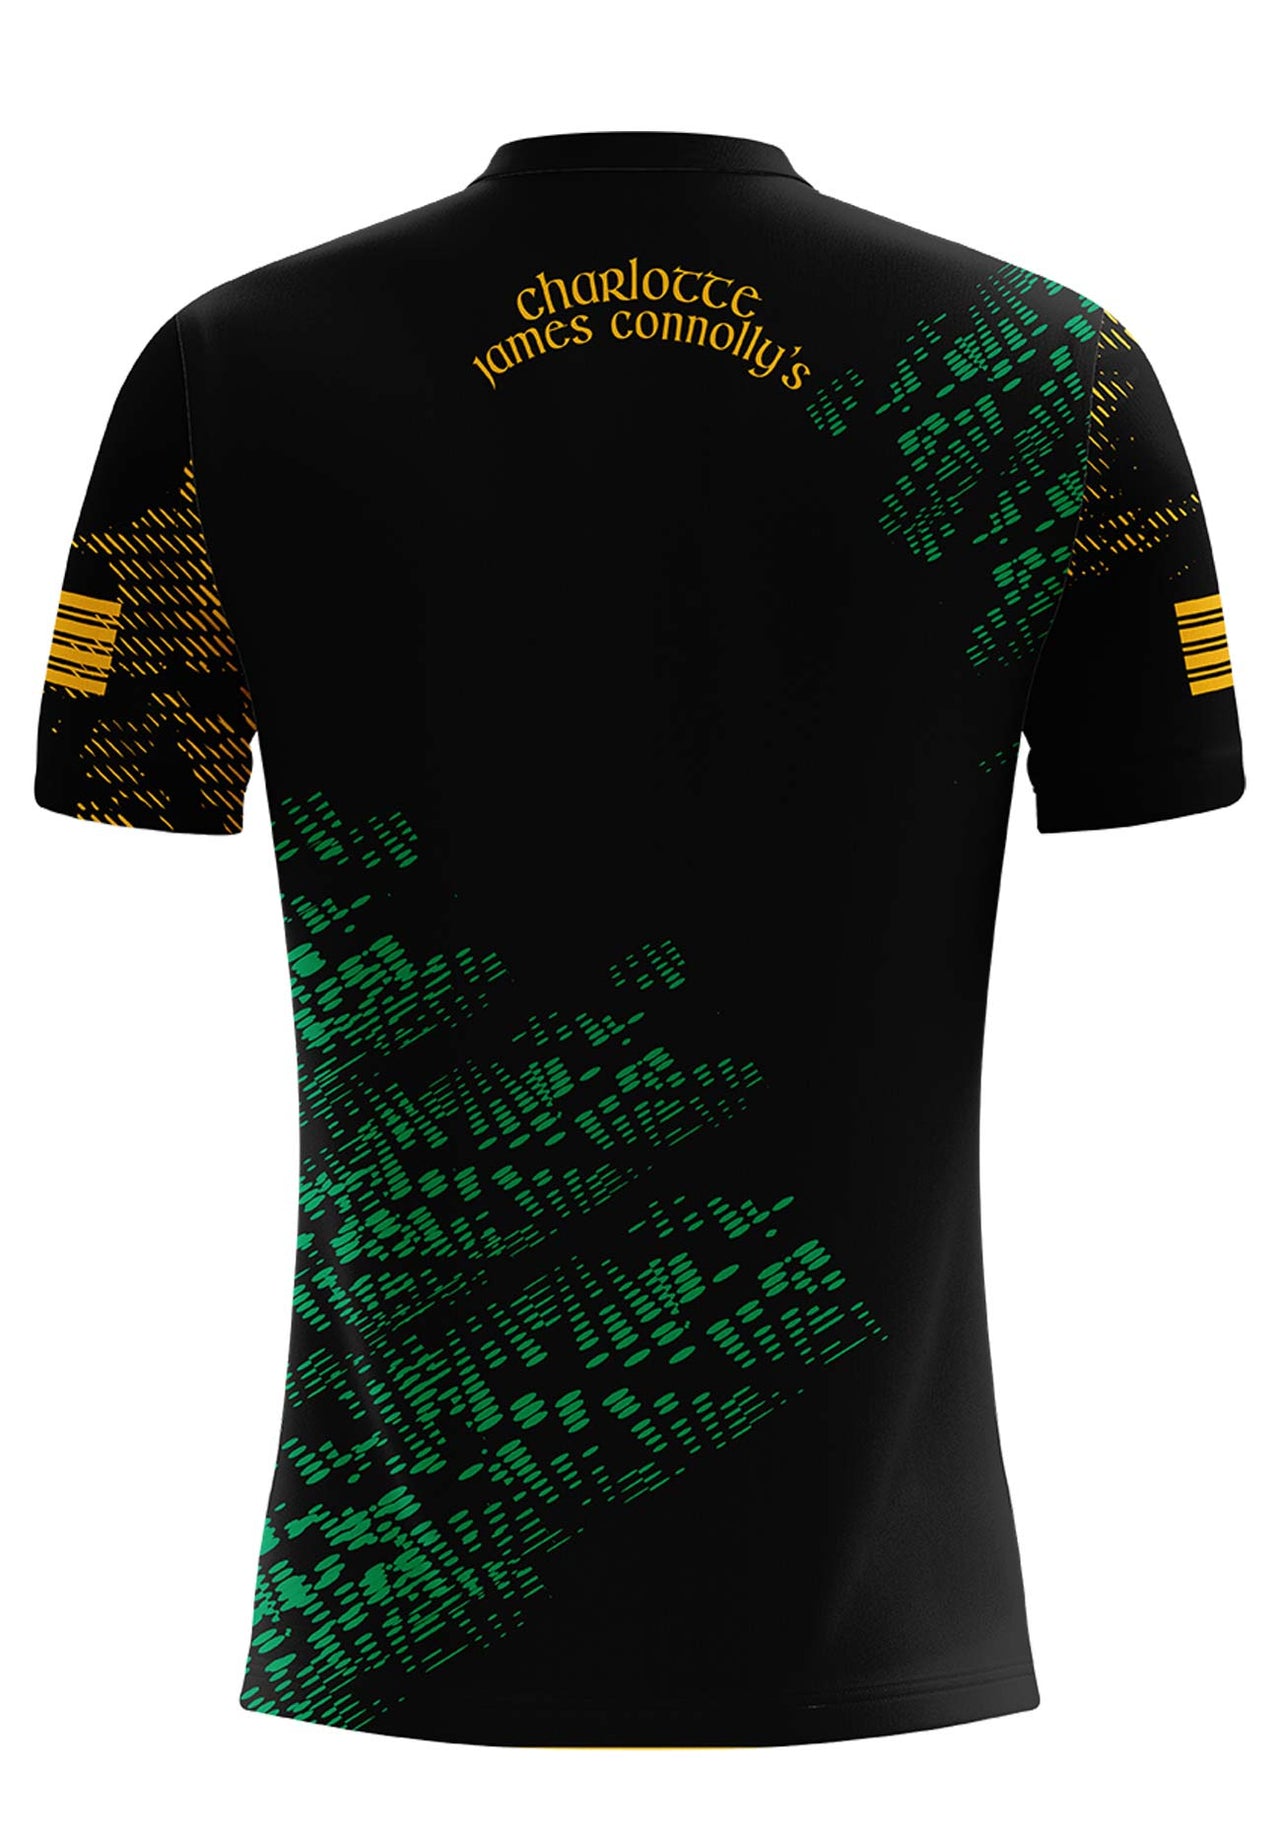 Charlotte James Connolly's Training Jersey Regular Fit Adult